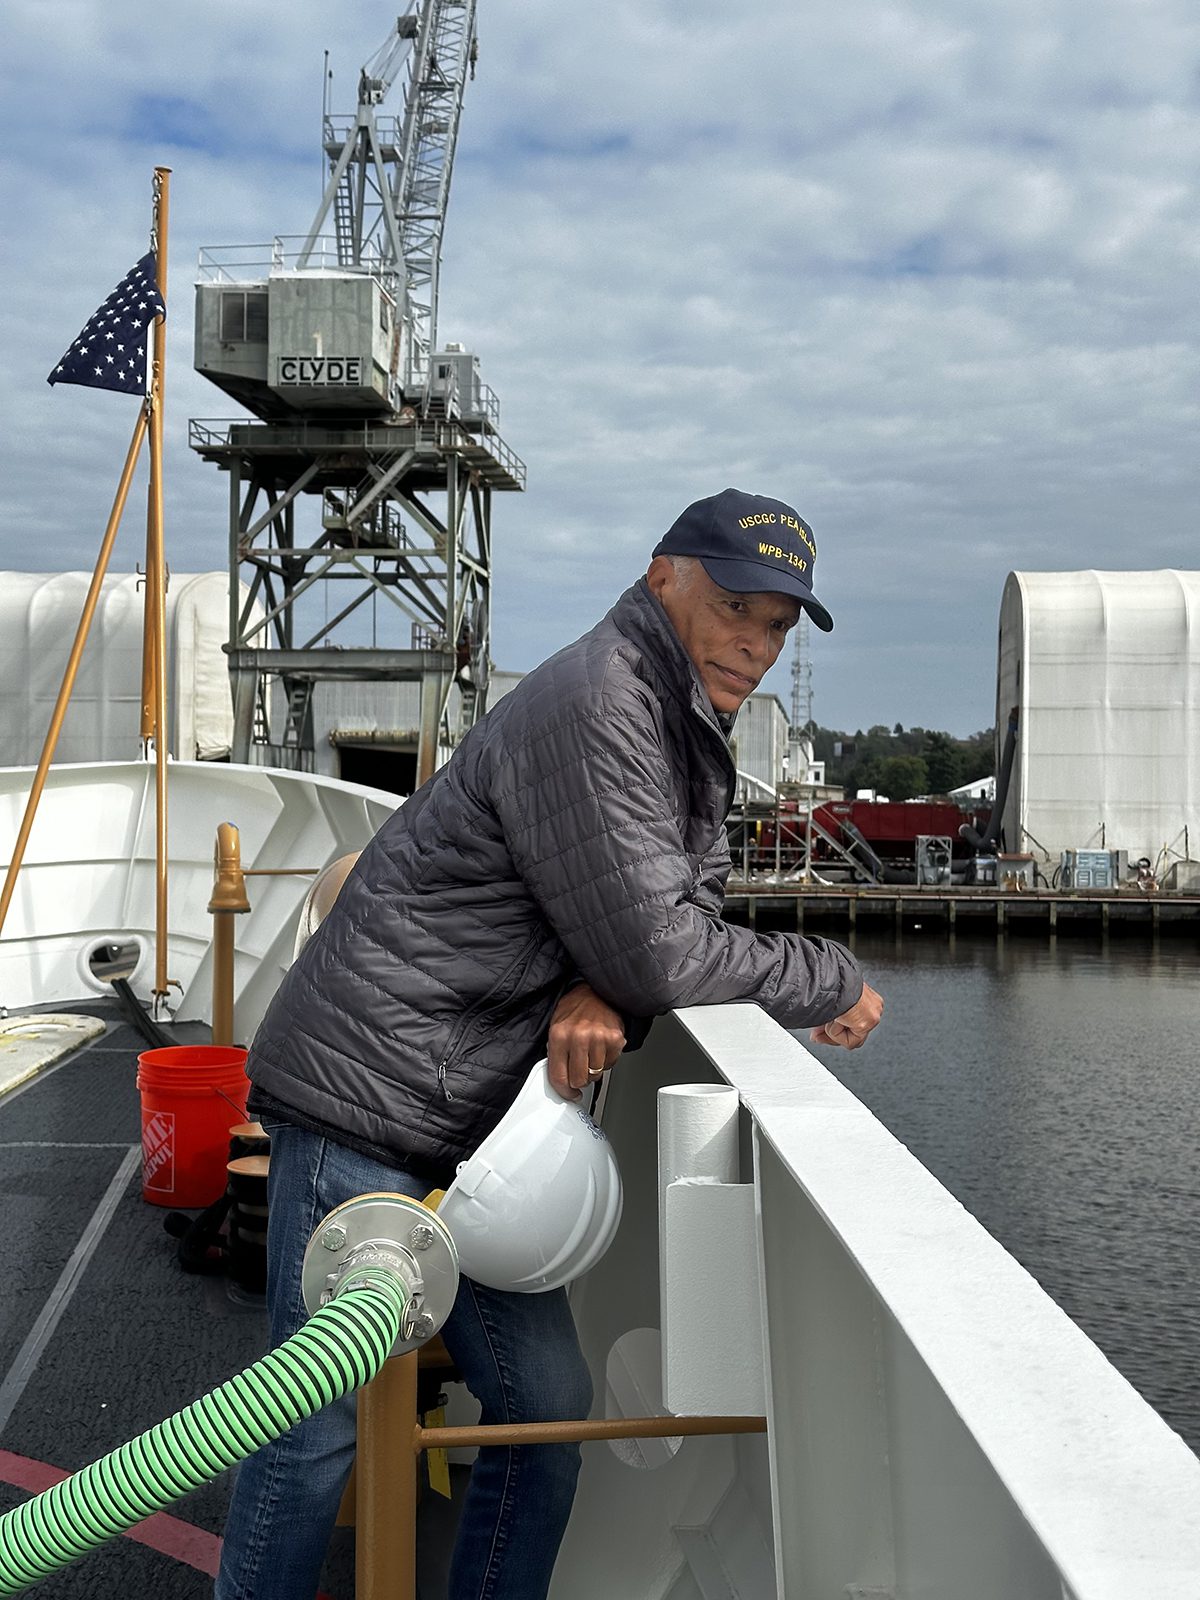 Marshall Collins, the late Lt. Herbert M. Collins’ son, stands on the deck of the cutter thinking about his father’s experiences when he worked on a cutter as a mess attendant in 1939. Photo: Sharon Warner